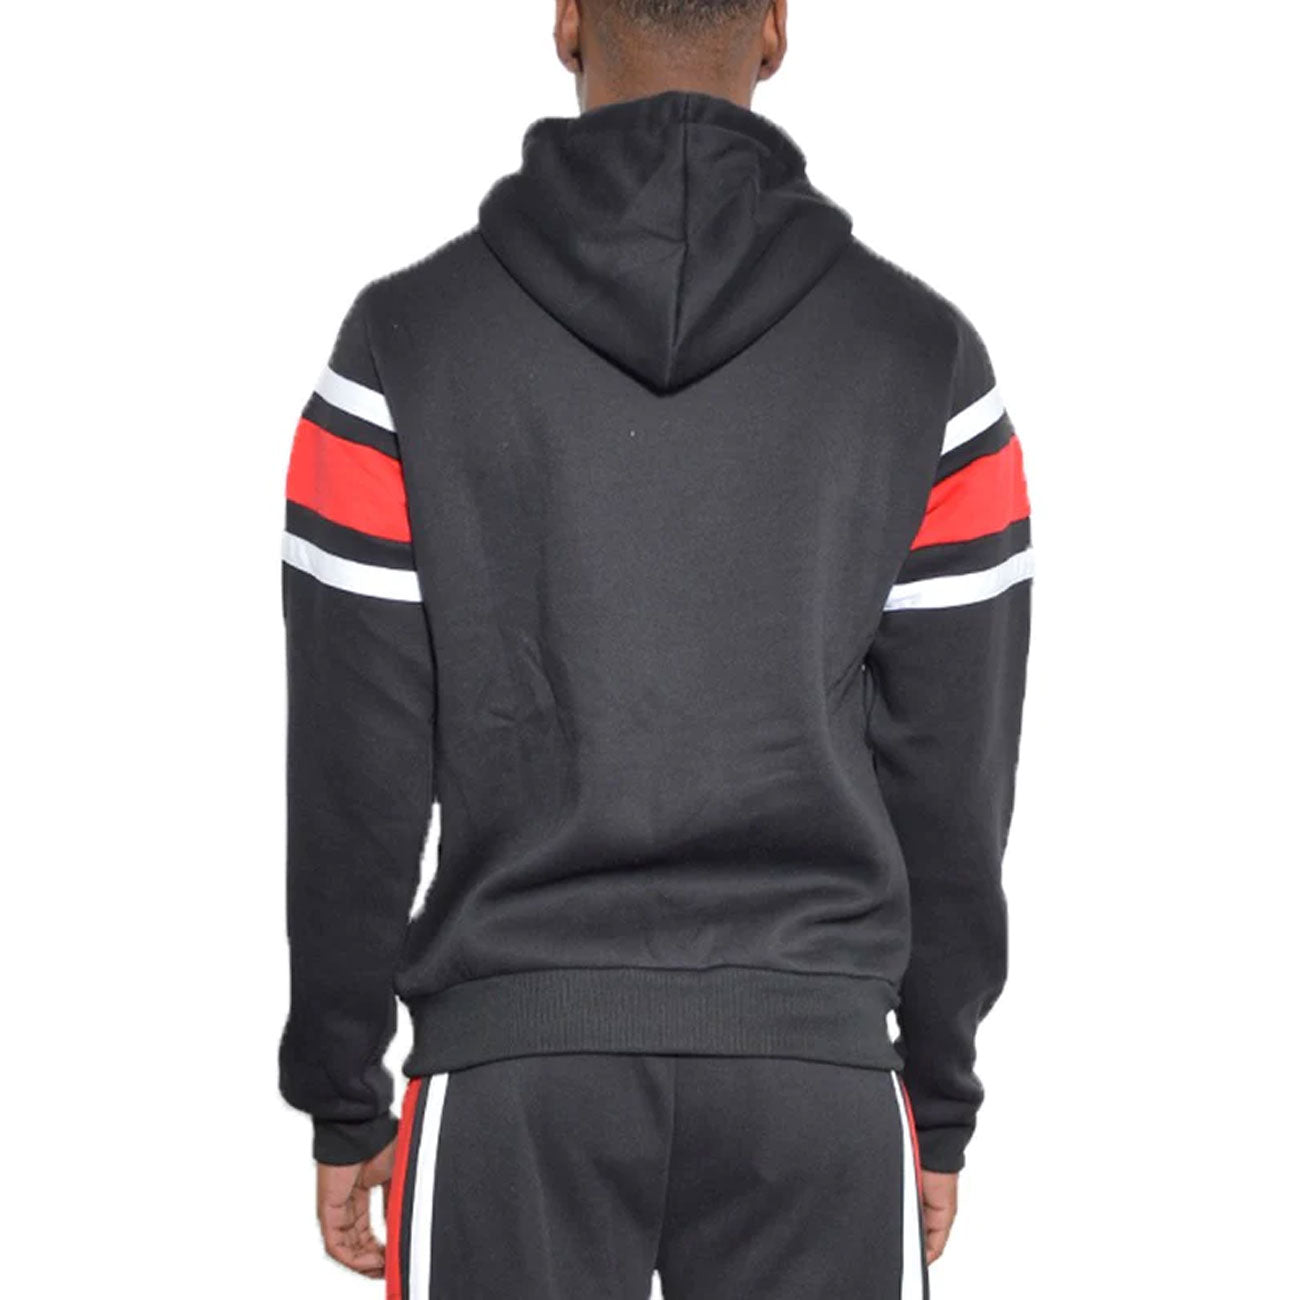 Solid With Three Stripe Pullover Hoodie for Men